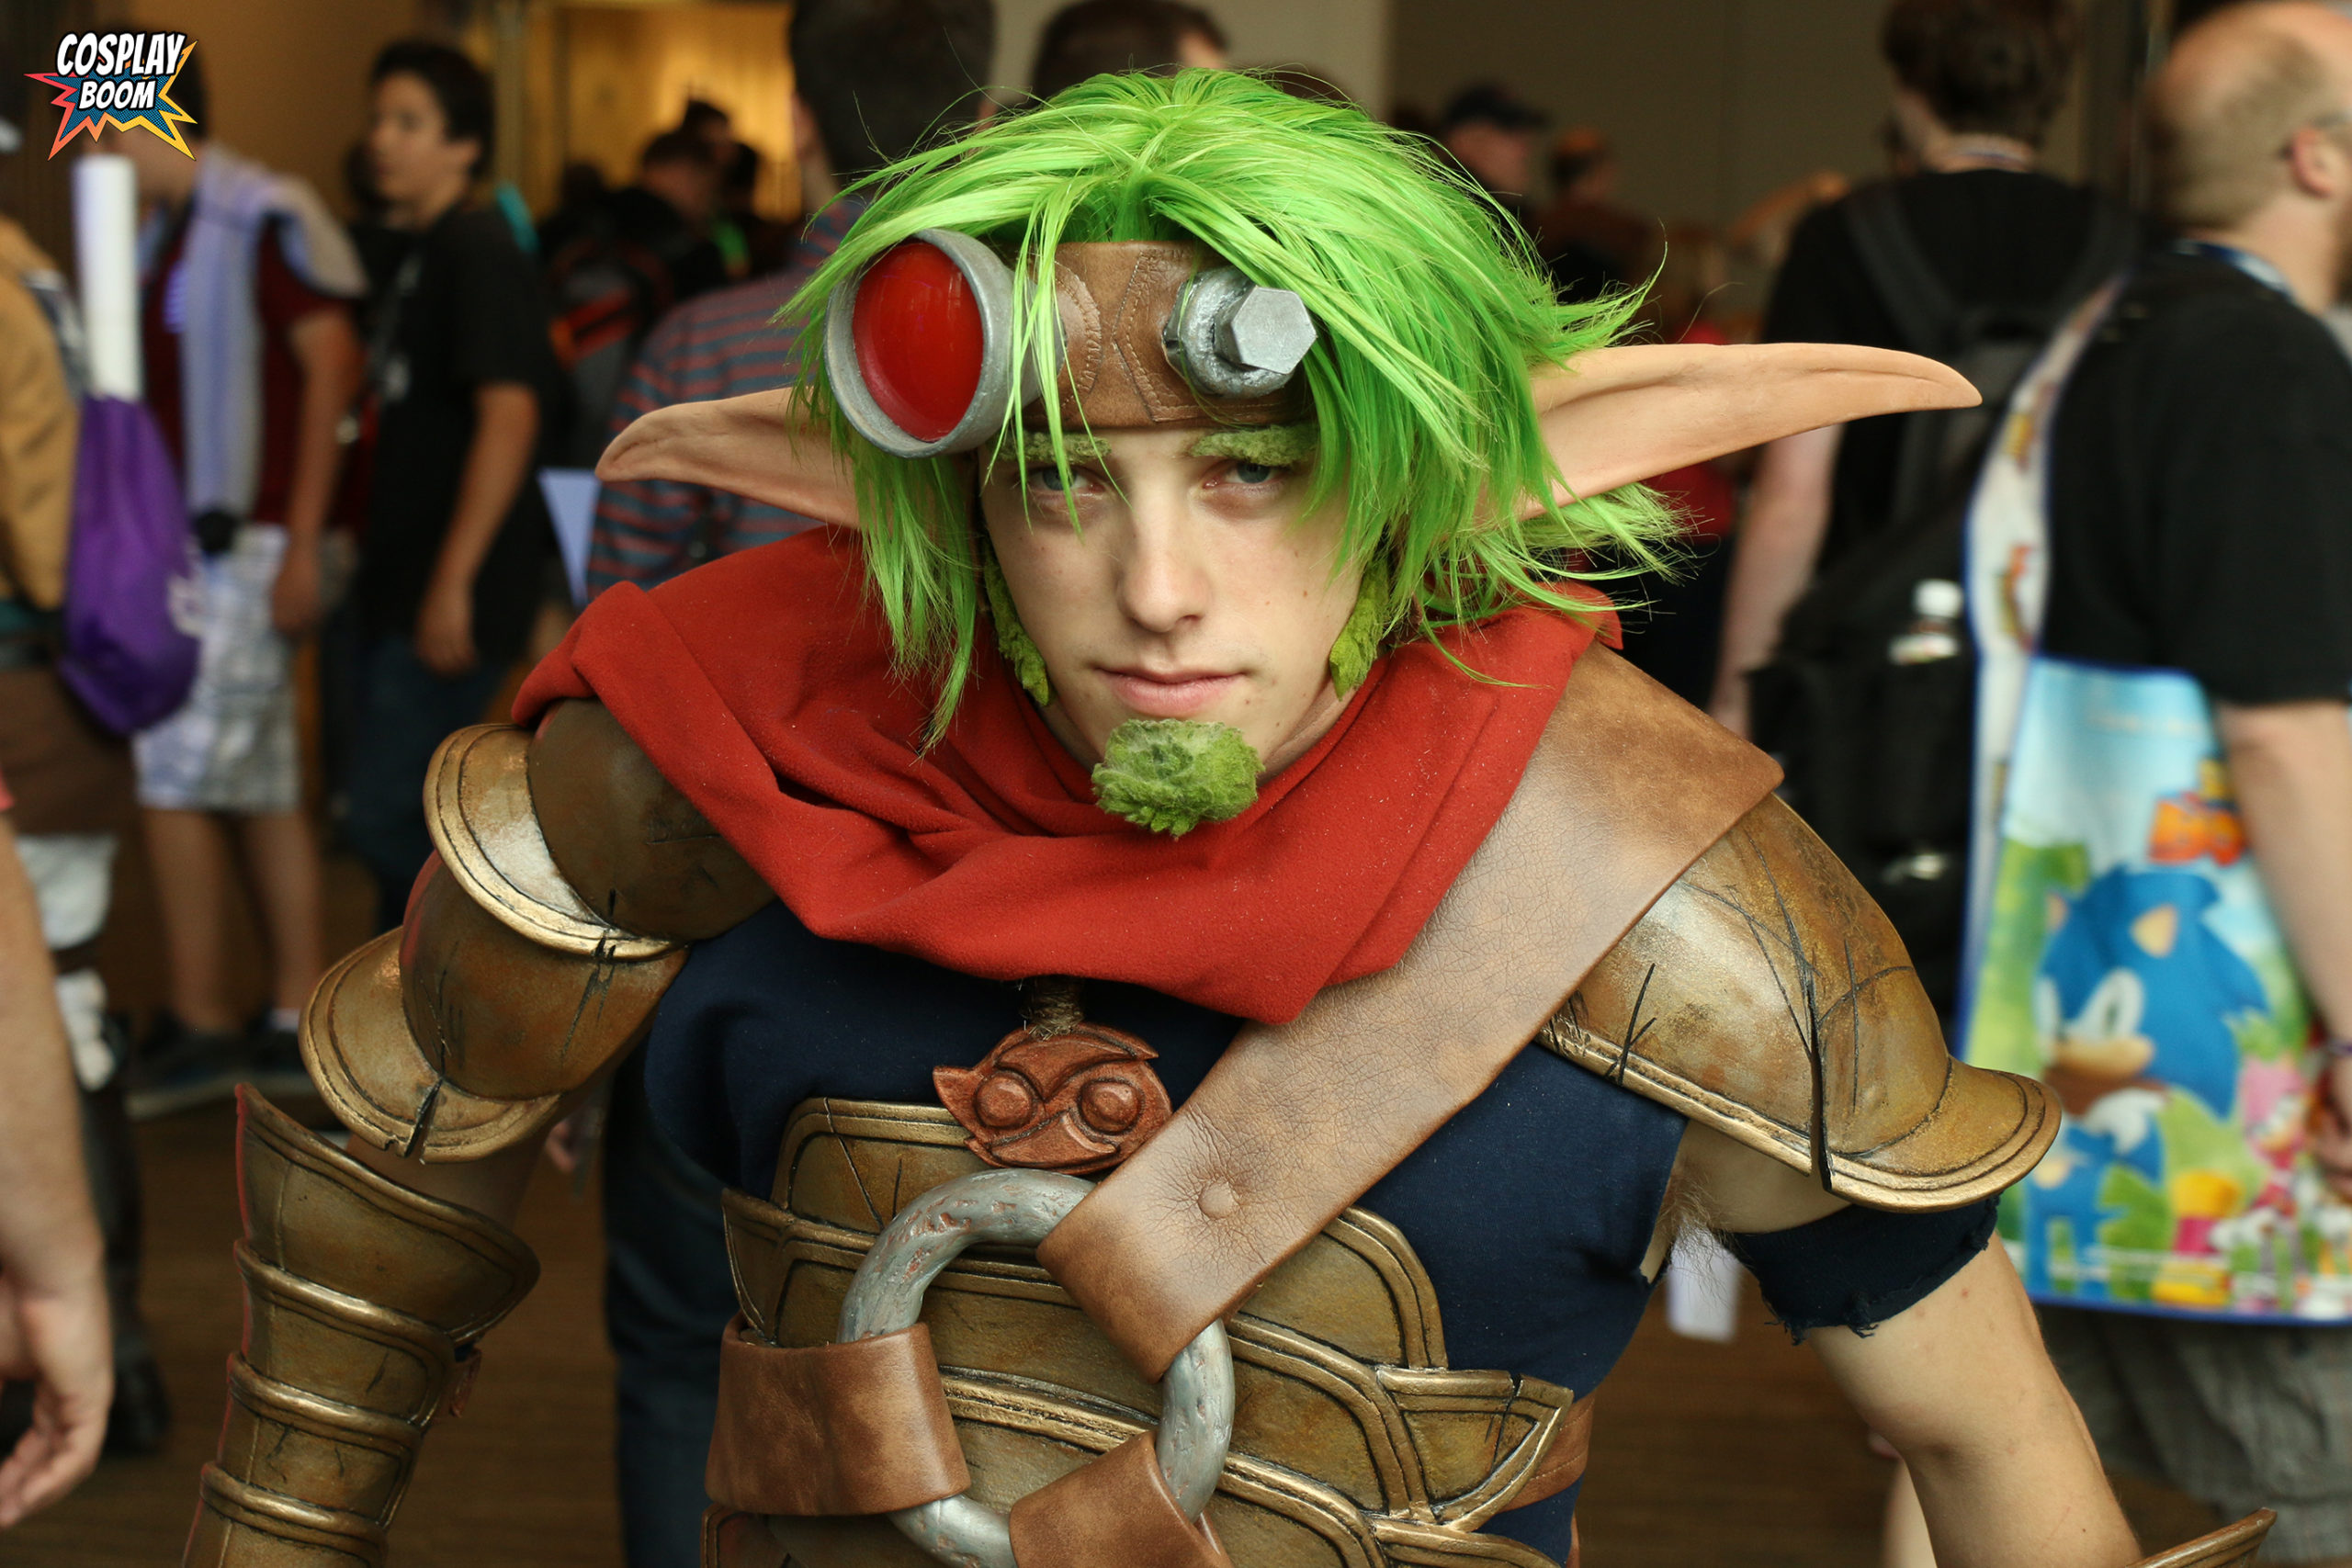 The Coolest Cosplay At PAX Prime, Day 3